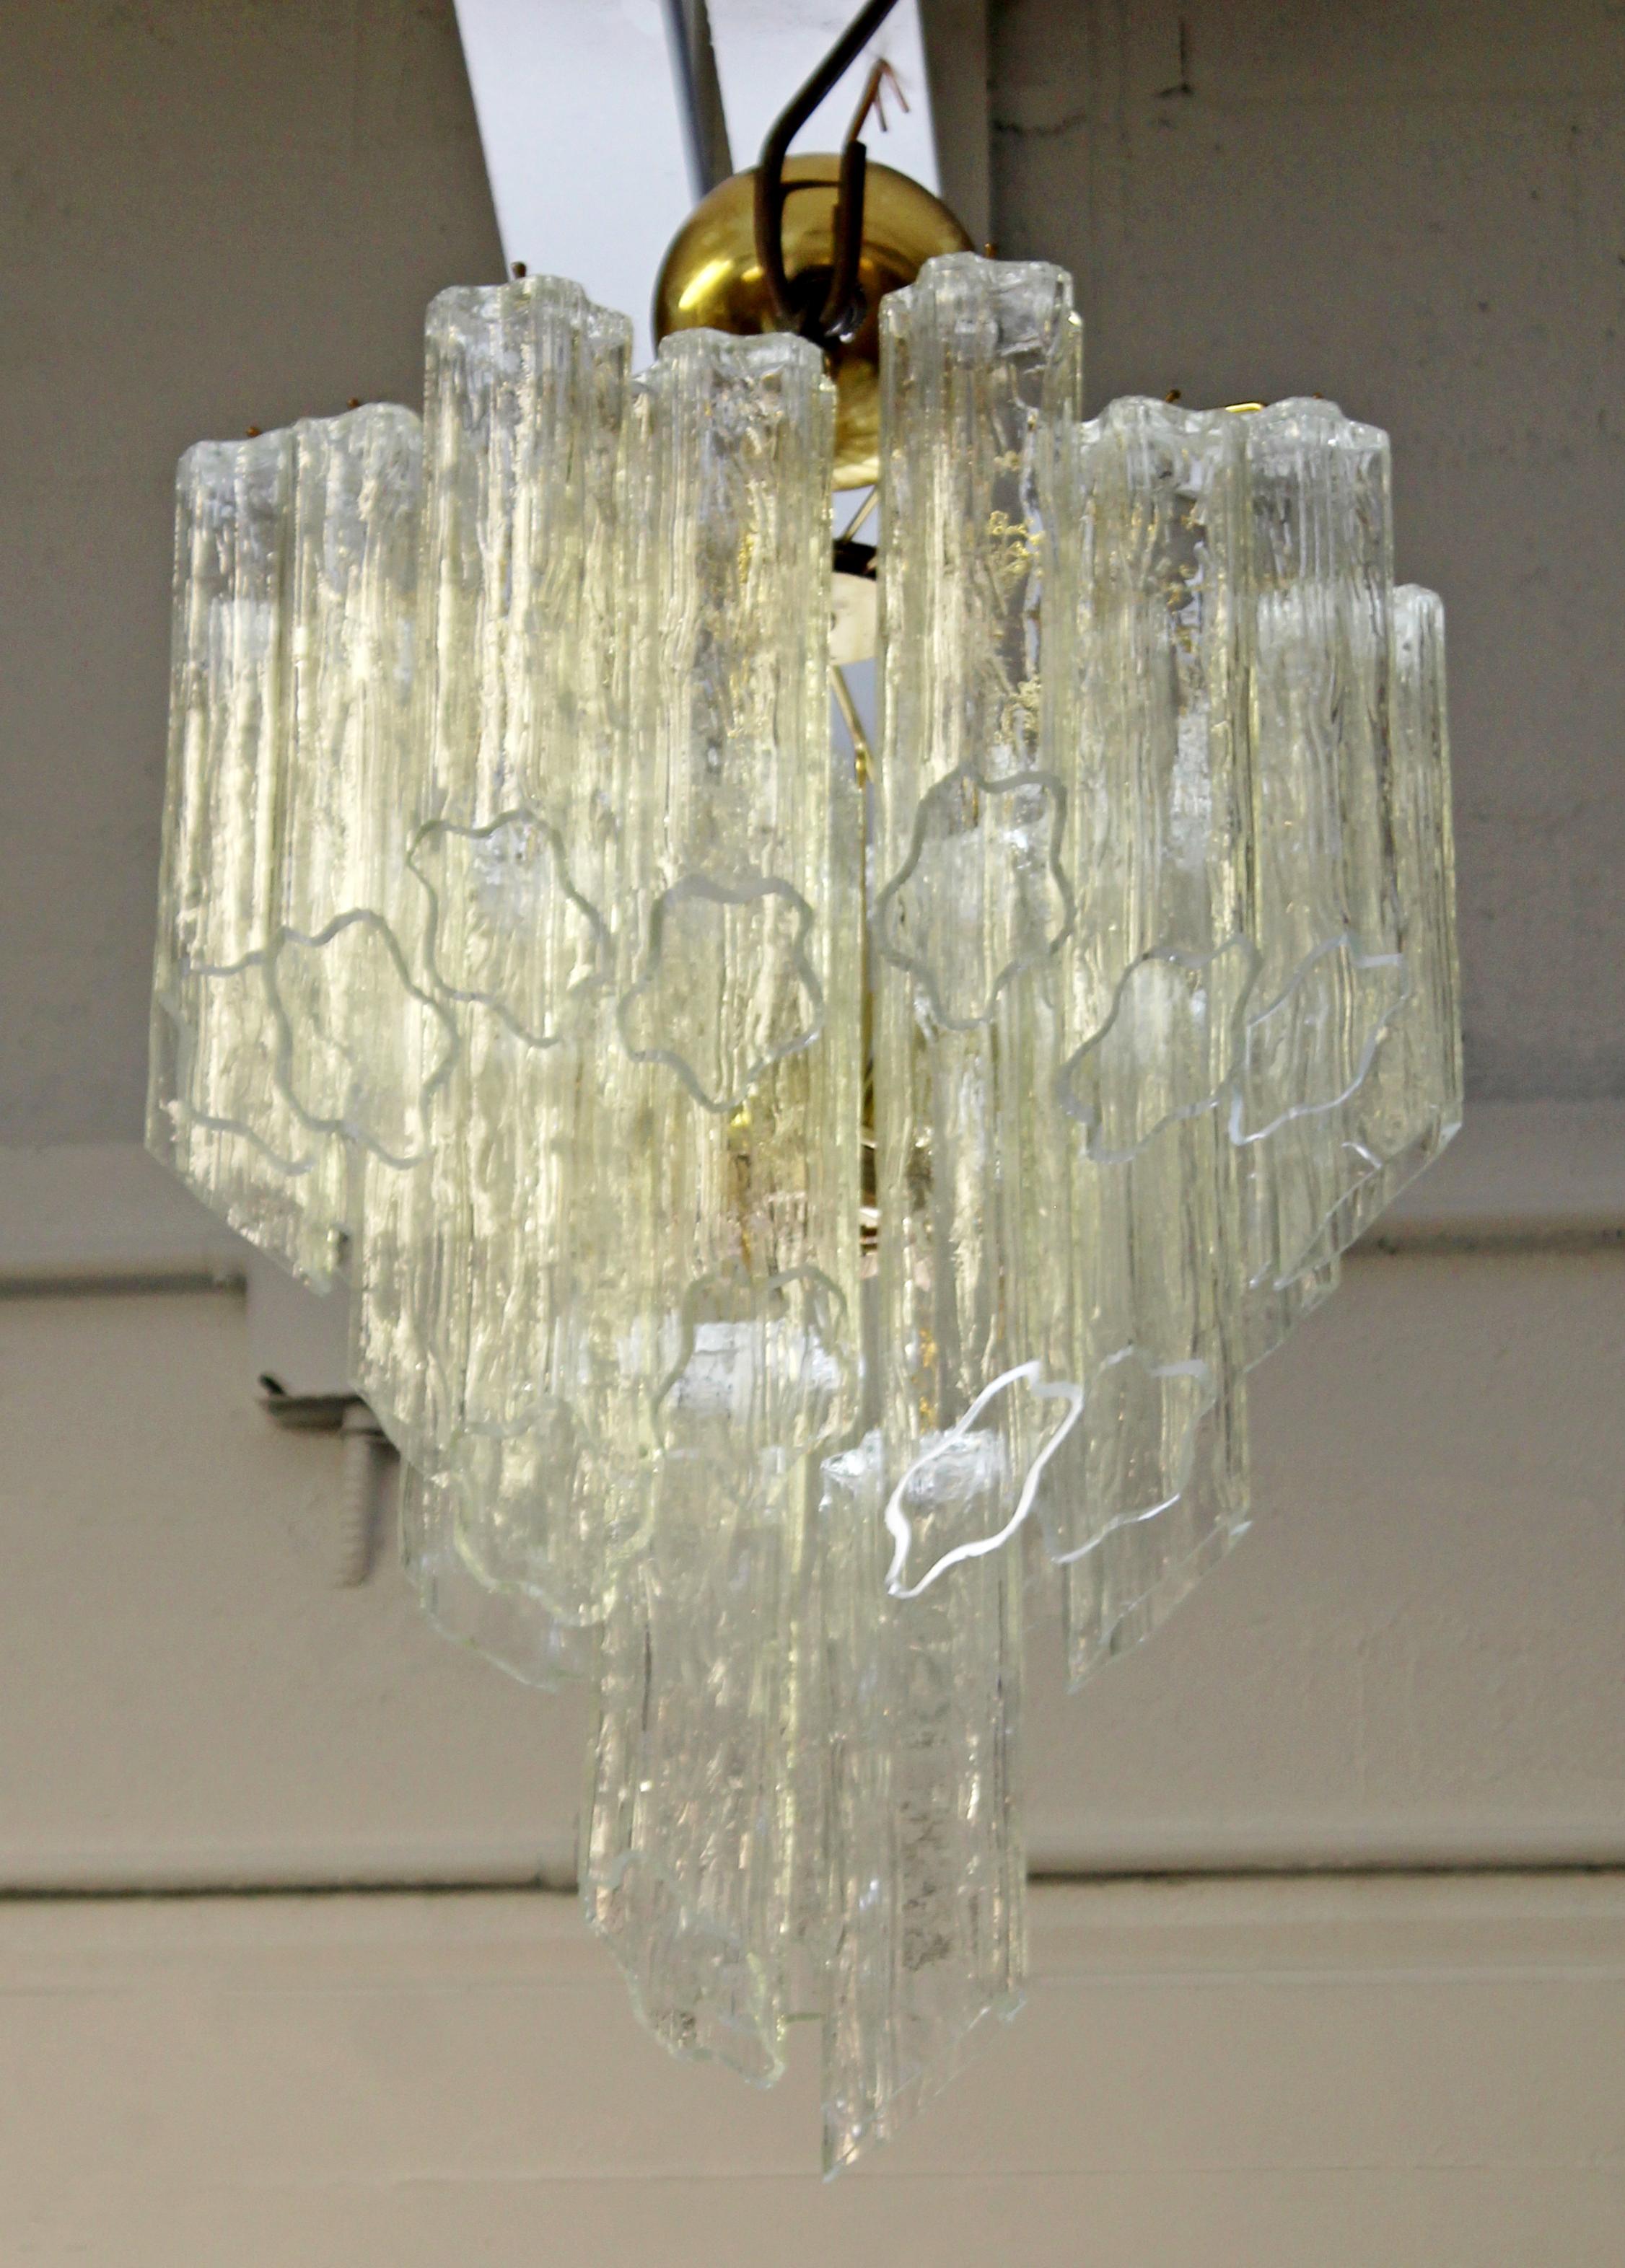 For your consideration is a phenomenal, tiered Murano slant cut glass and brass chandelier, made in Italy, circa 1970s. In excellent condition. The dimensions are 16